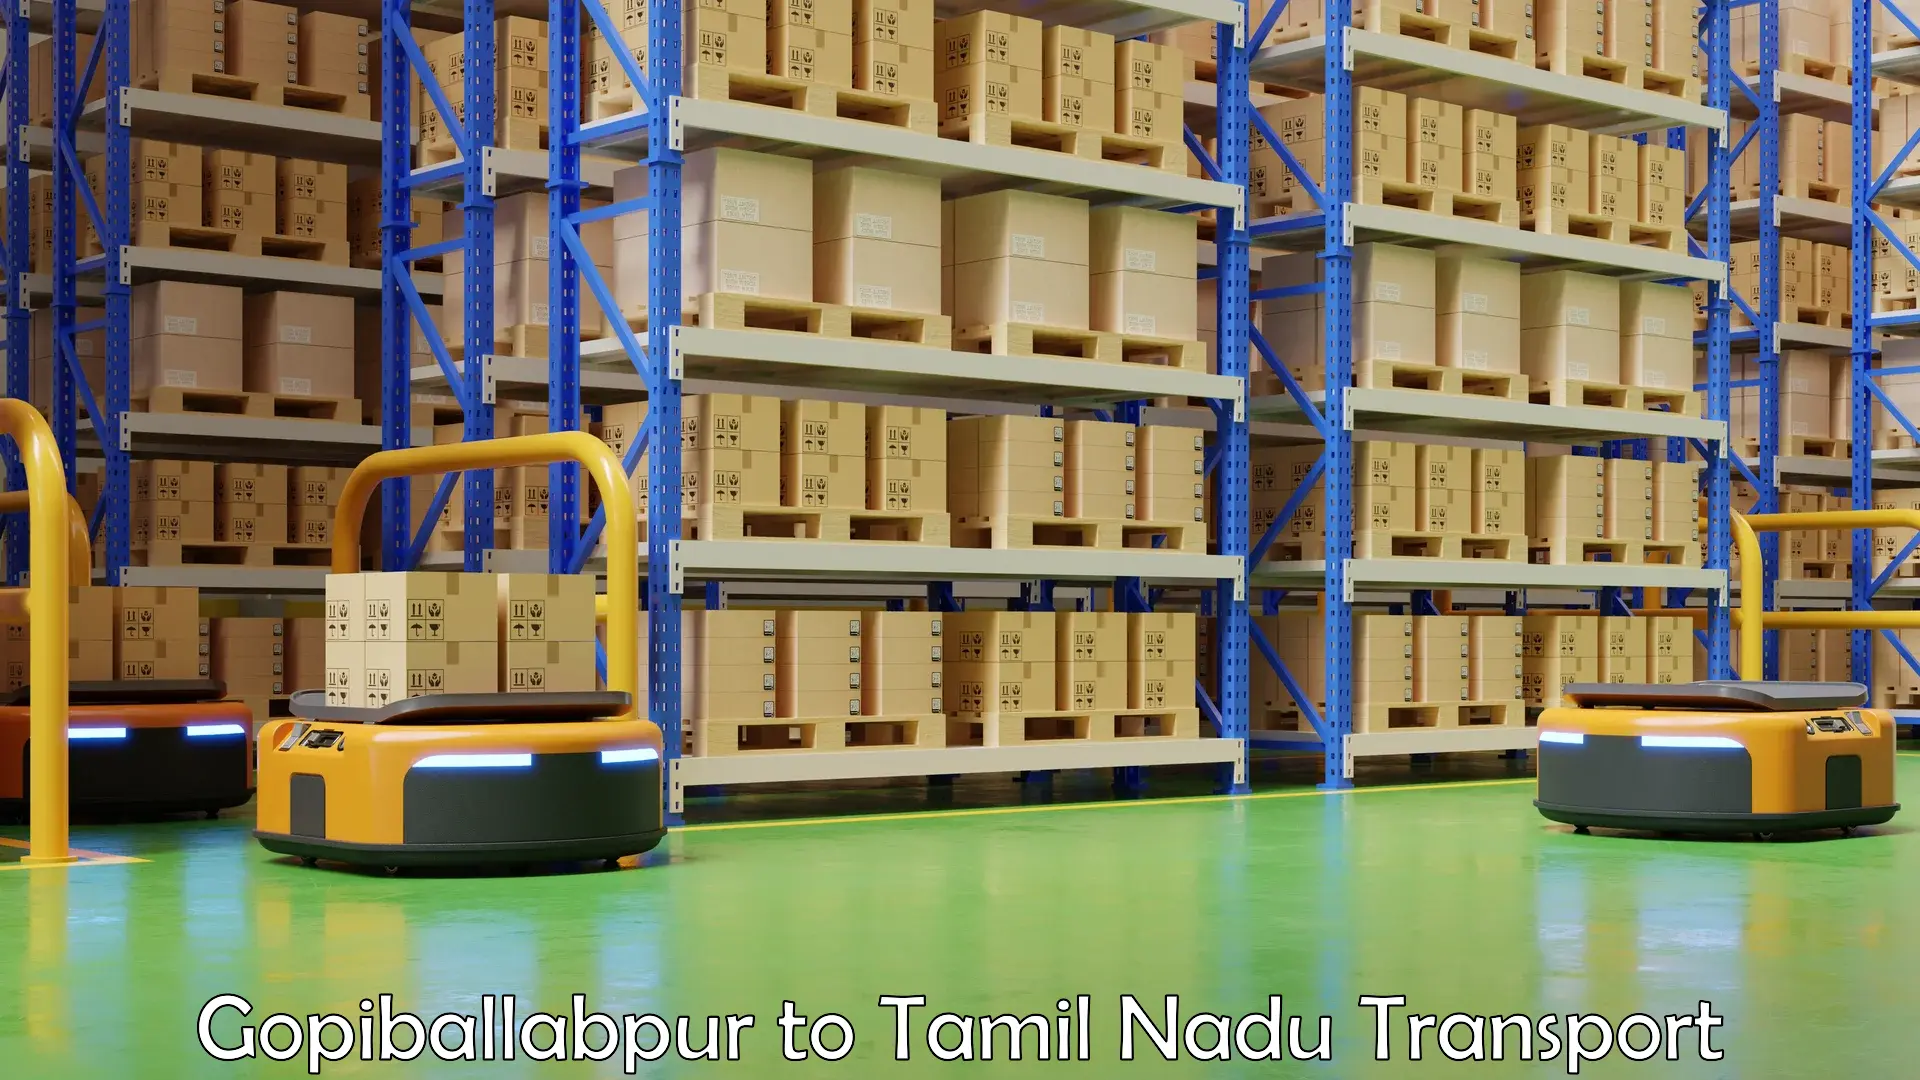 Road transport online services Gopiballabpur to Vellore Institute of Technology